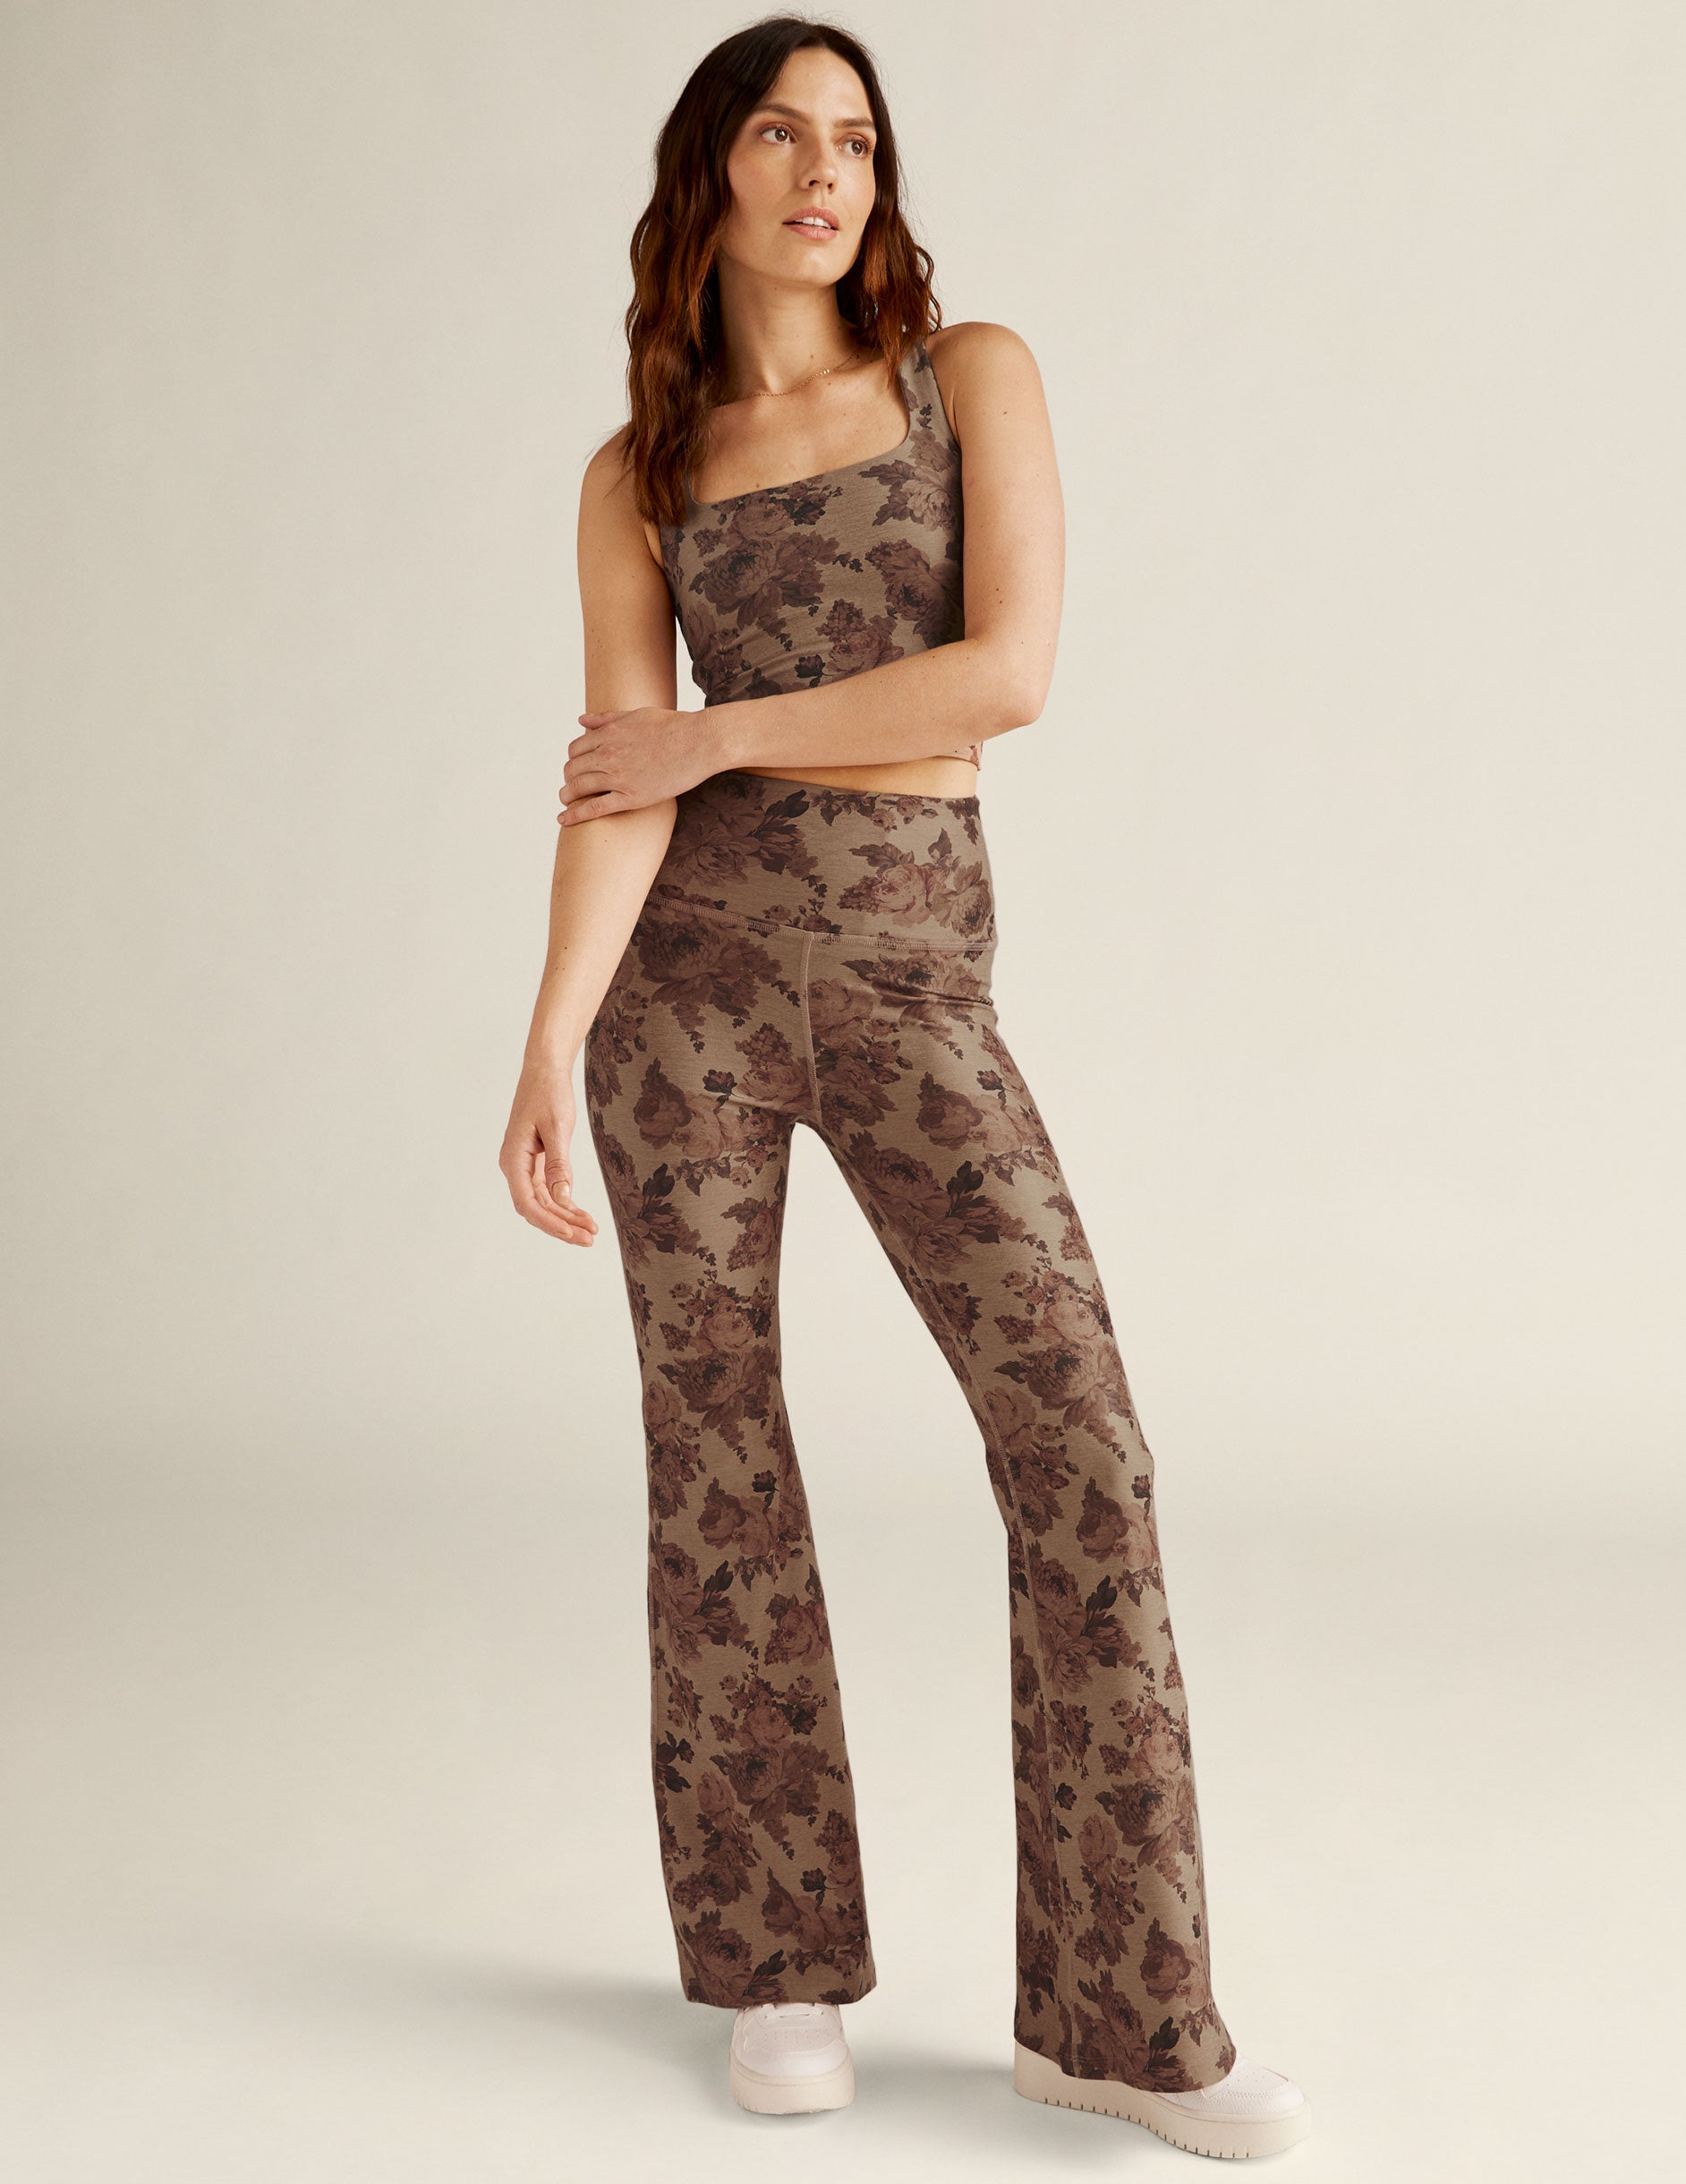 Softmark High Waisted Leggings - Romantic Floral – OMgoing